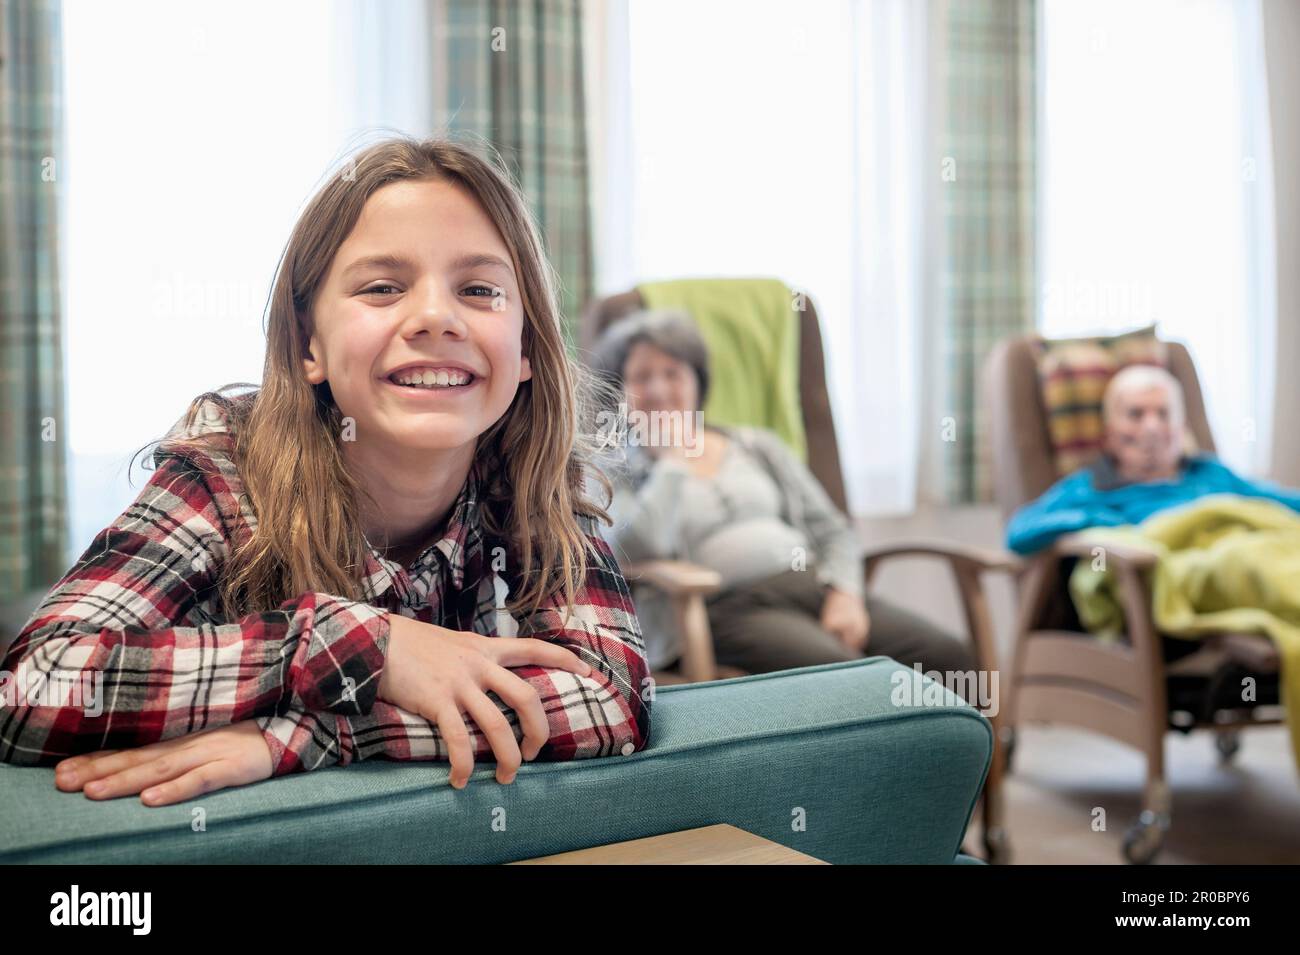 Portrait of happy girl at rest home Stock Photo